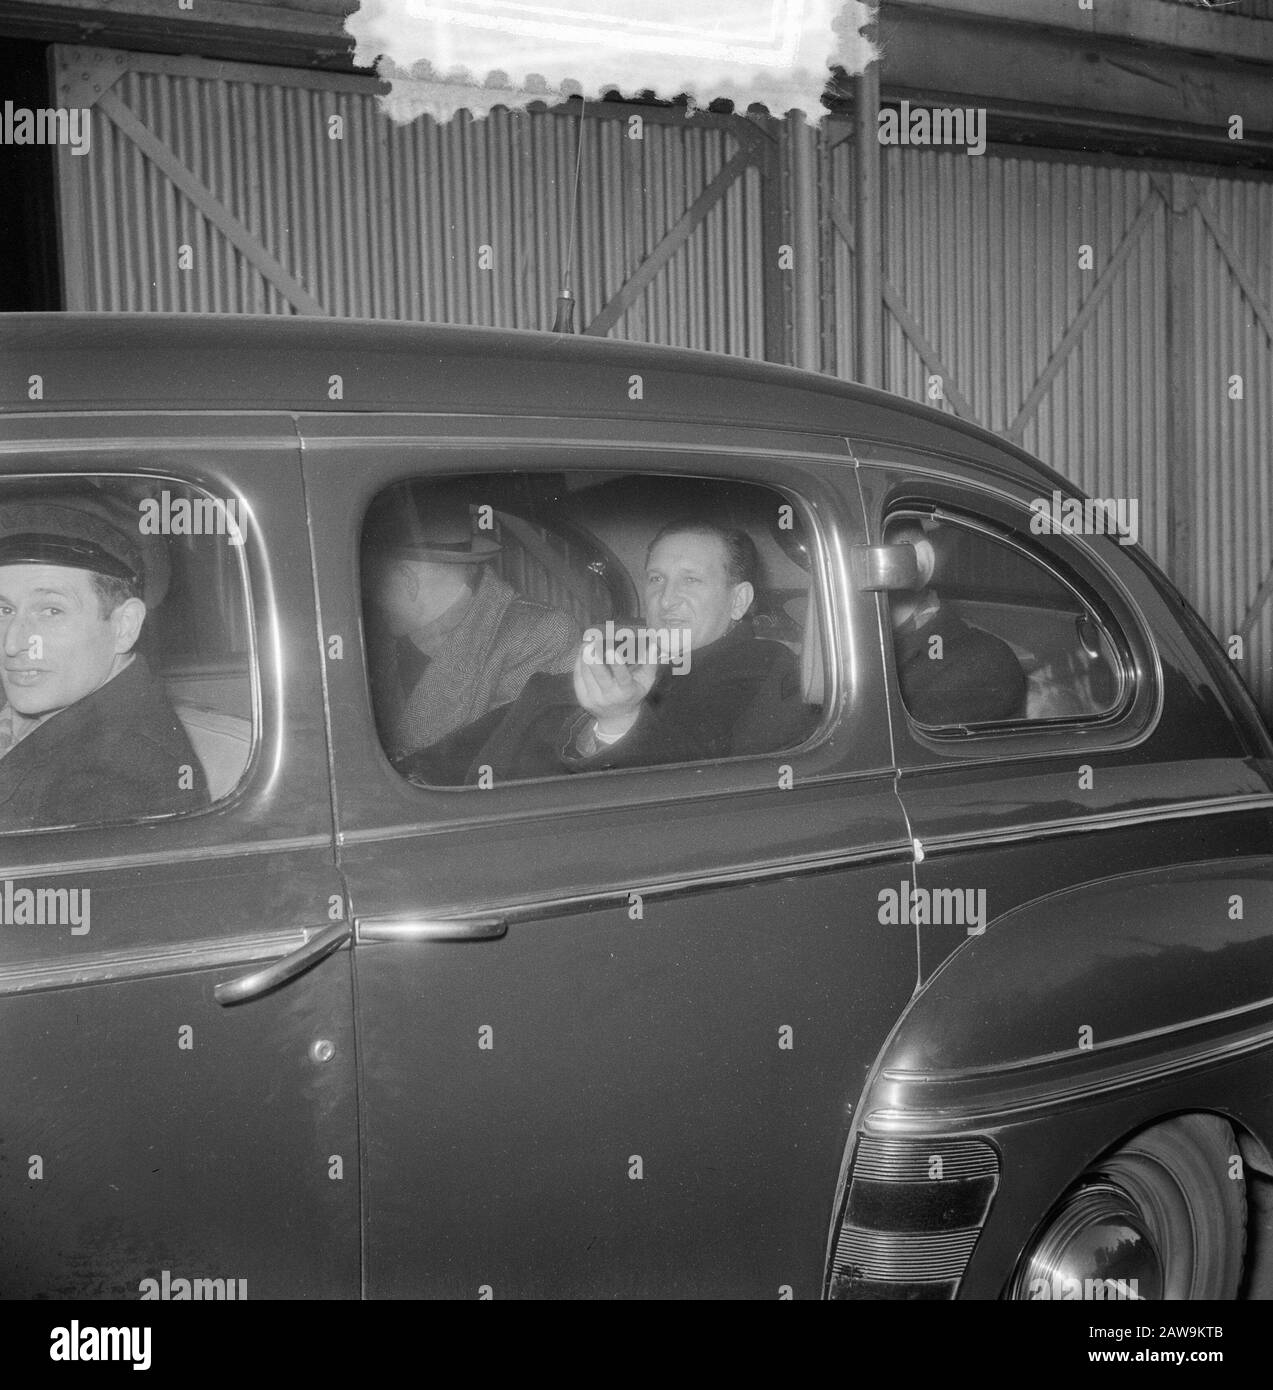 Lev Konstantinowitsj Pissarew, correspondent of the Russian news agency Tass, is he under police escort transported to the Stone Head at the IJ is expelled with the Russian tugboat Priliv date: February 25, 1953 Location: Amsterdam, USSR Keywords: cars, journalists, spying, evictions Person Name: Pissarew Lev, Tass Stock Photo